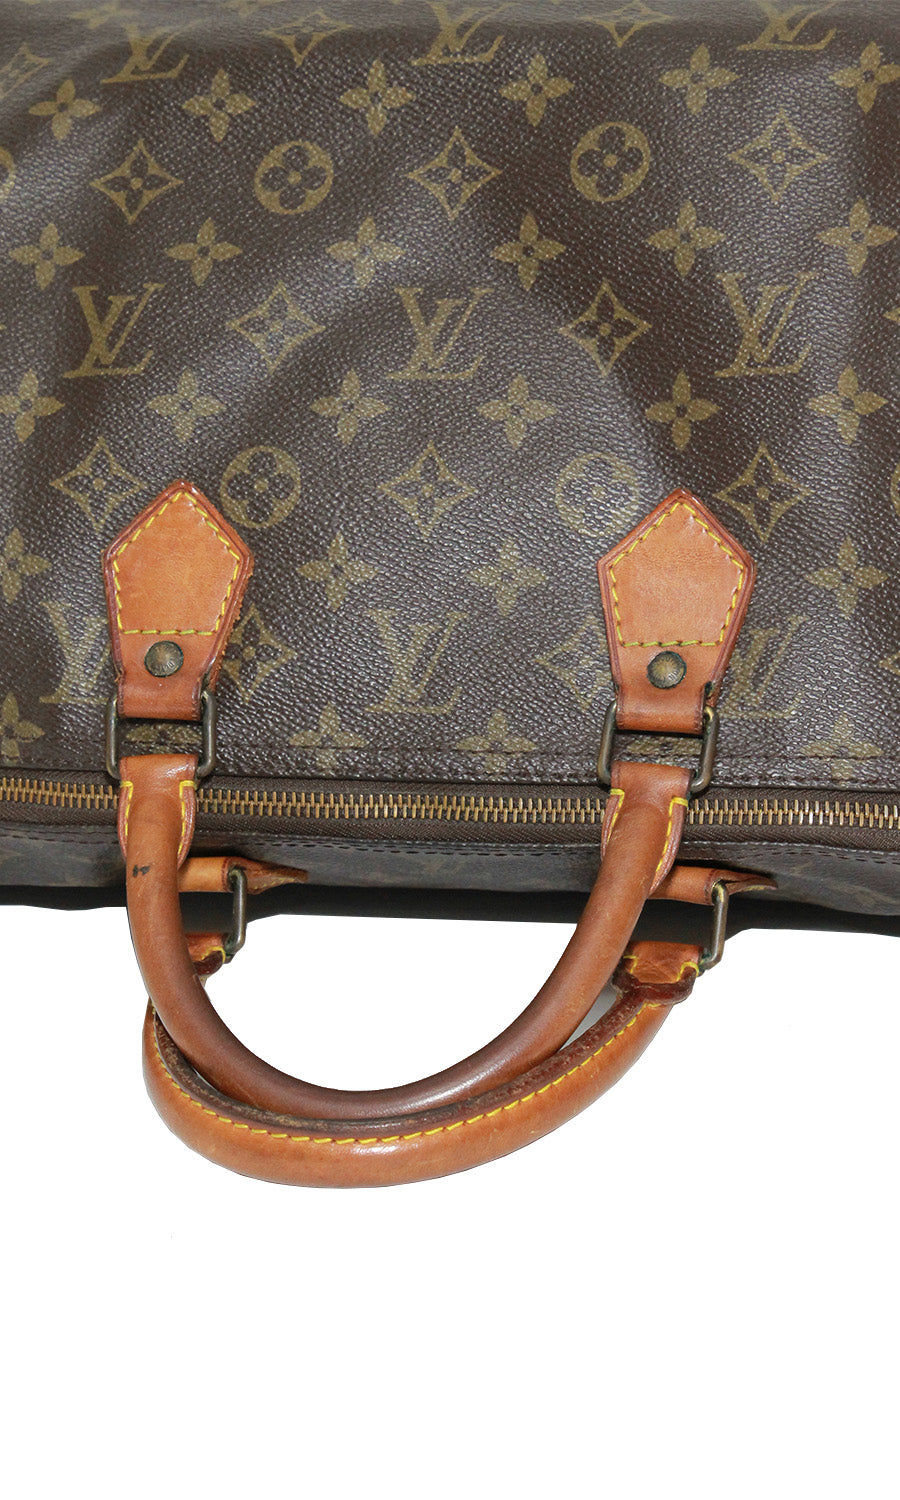 She's 10 years older than me and 1 of 500 — the Speedy 18 released for Louis  Vuitton Japan's 10th anniversary in 1988 (made in France) 🤩🦄 :  r/Louisvuitton